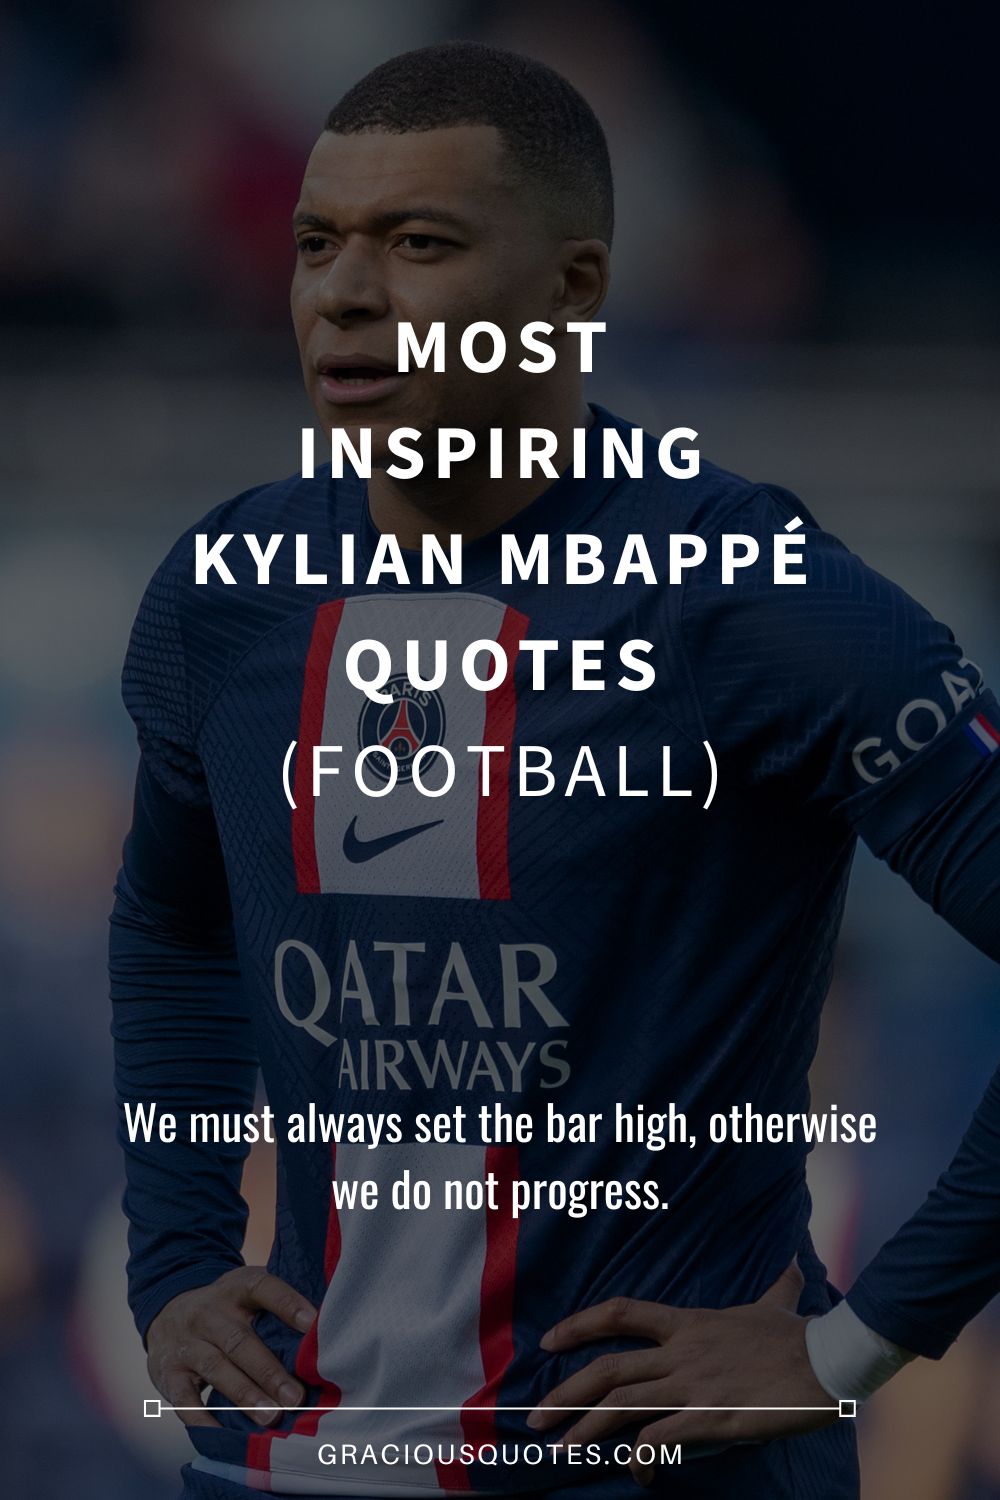 Most Inspiring Kylian Mbappé Quotes (FOOTBALL) - Gracious Quotes